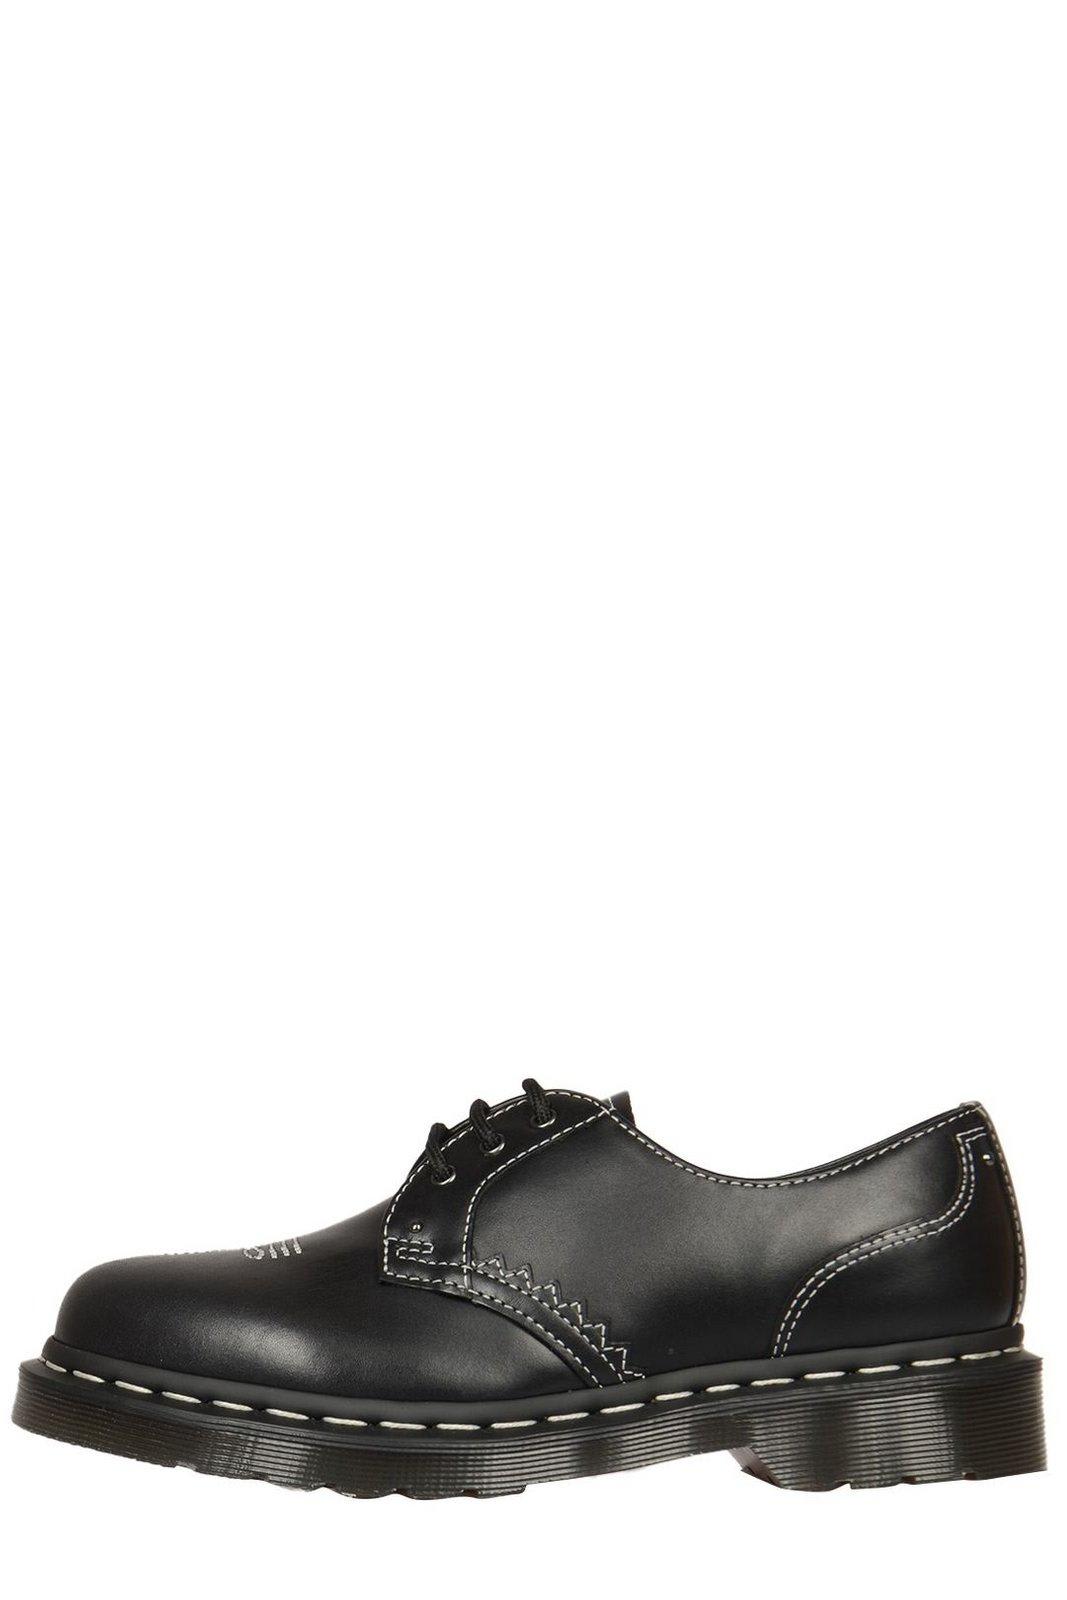 DR. MARTENS' 1461 GOTHIC AMERCIANA OXFORD SHOES